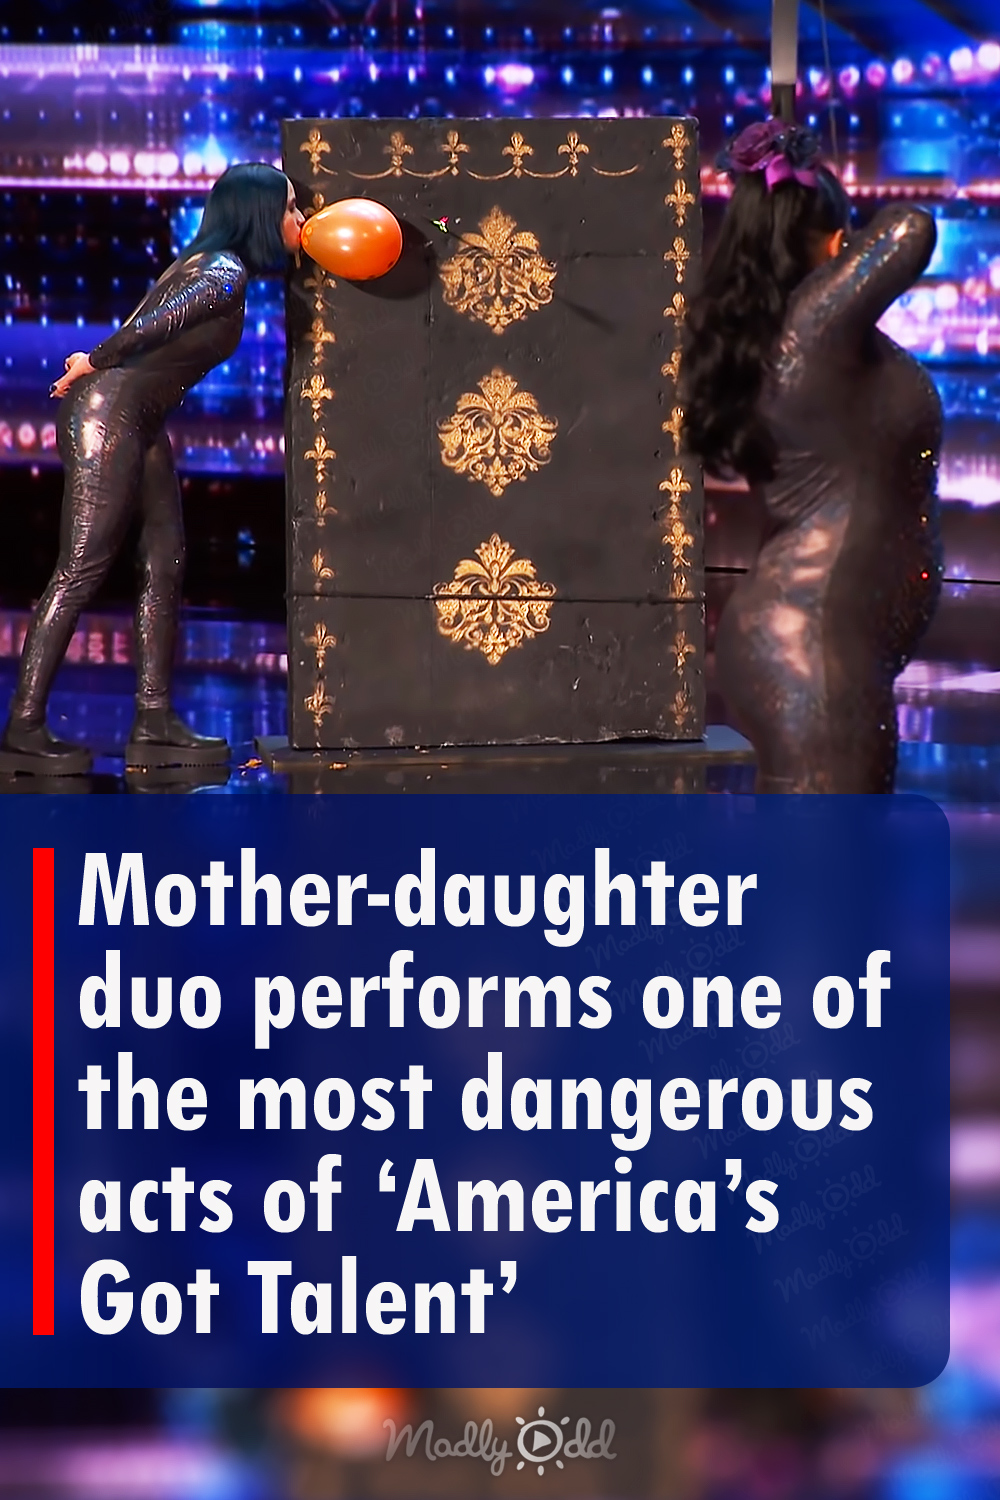 Mother-daughter duo performs one of the most dangerous acts of ‘America’s Got Talent’